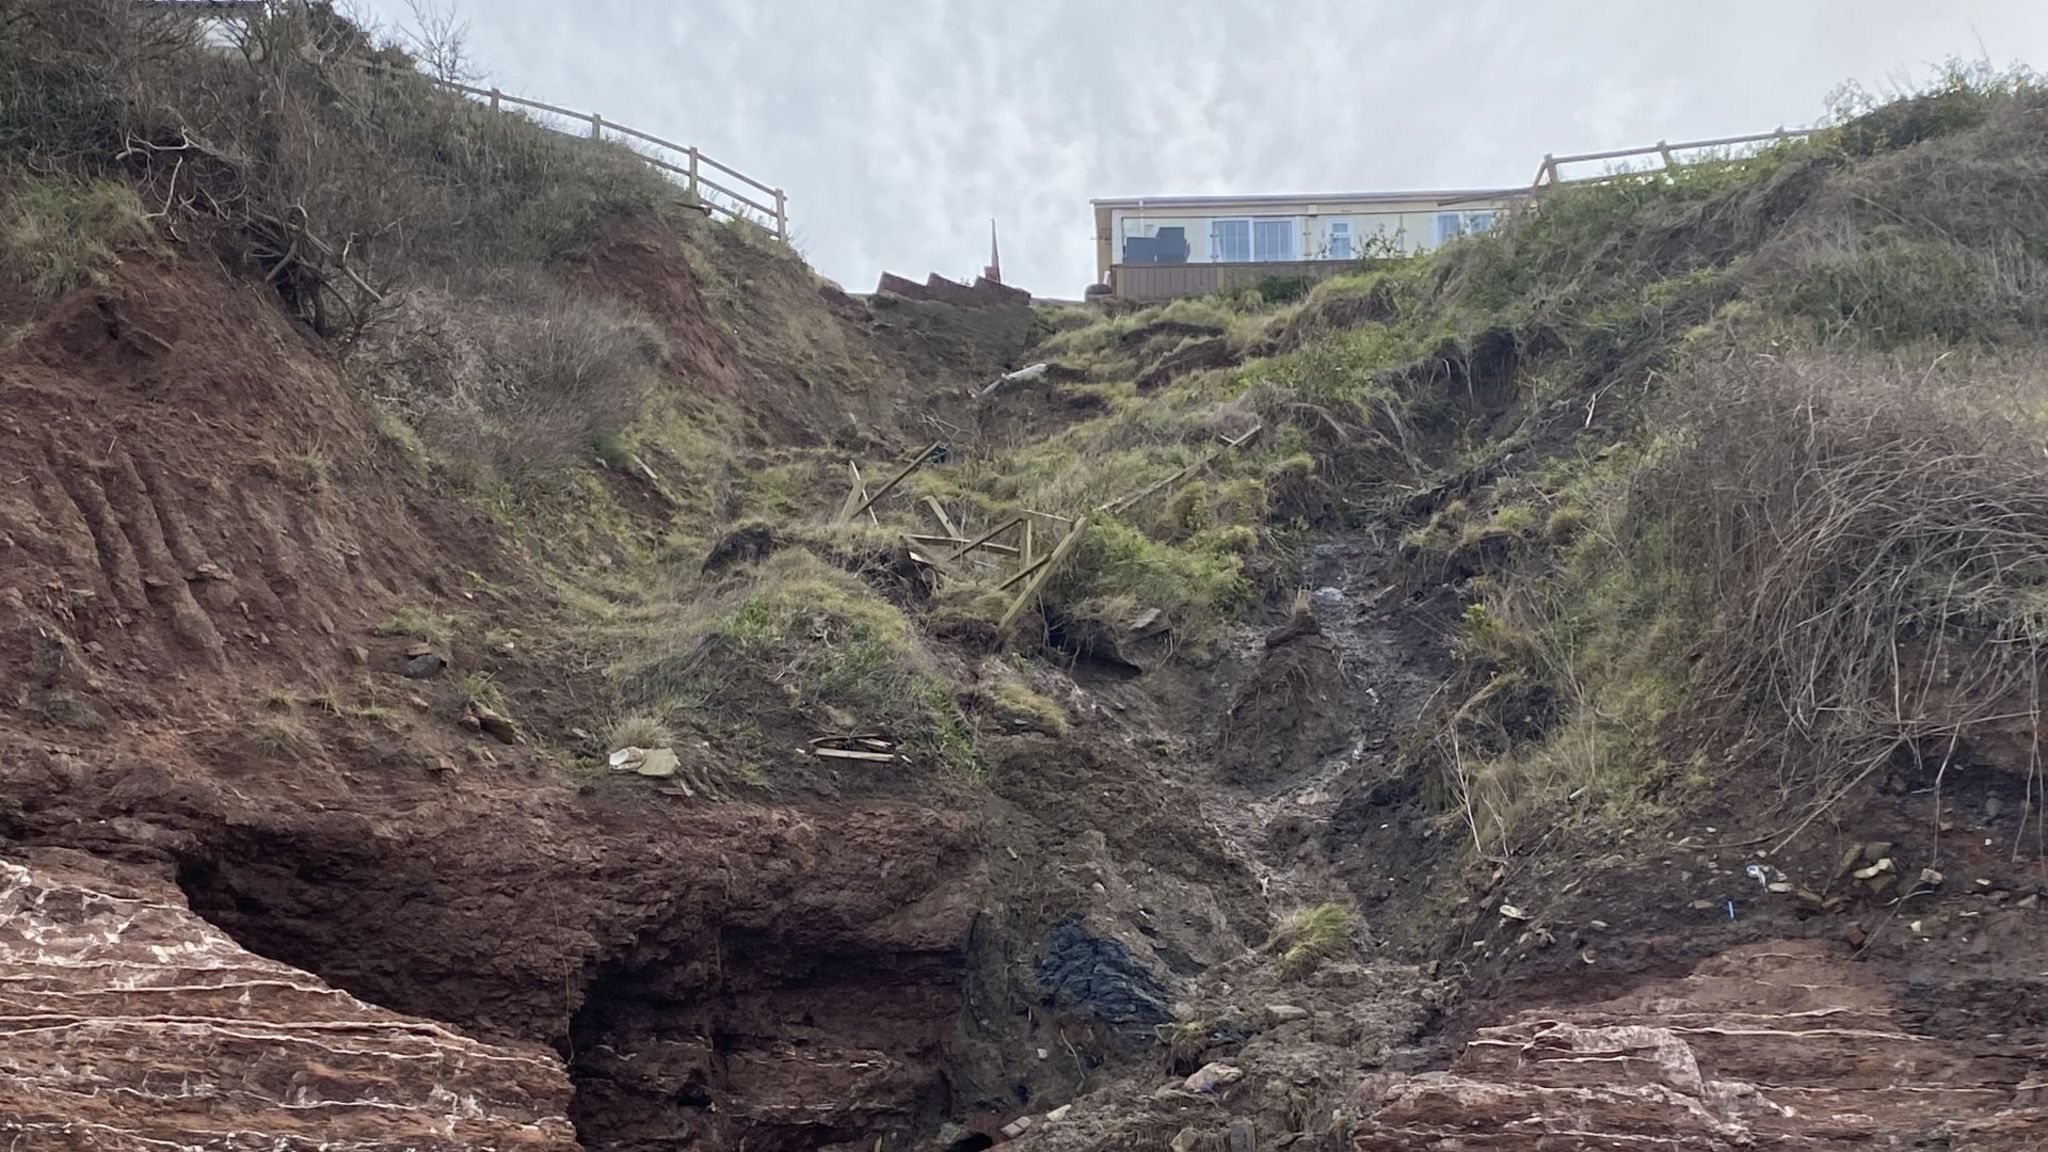 Eroding cliff face in Watchet